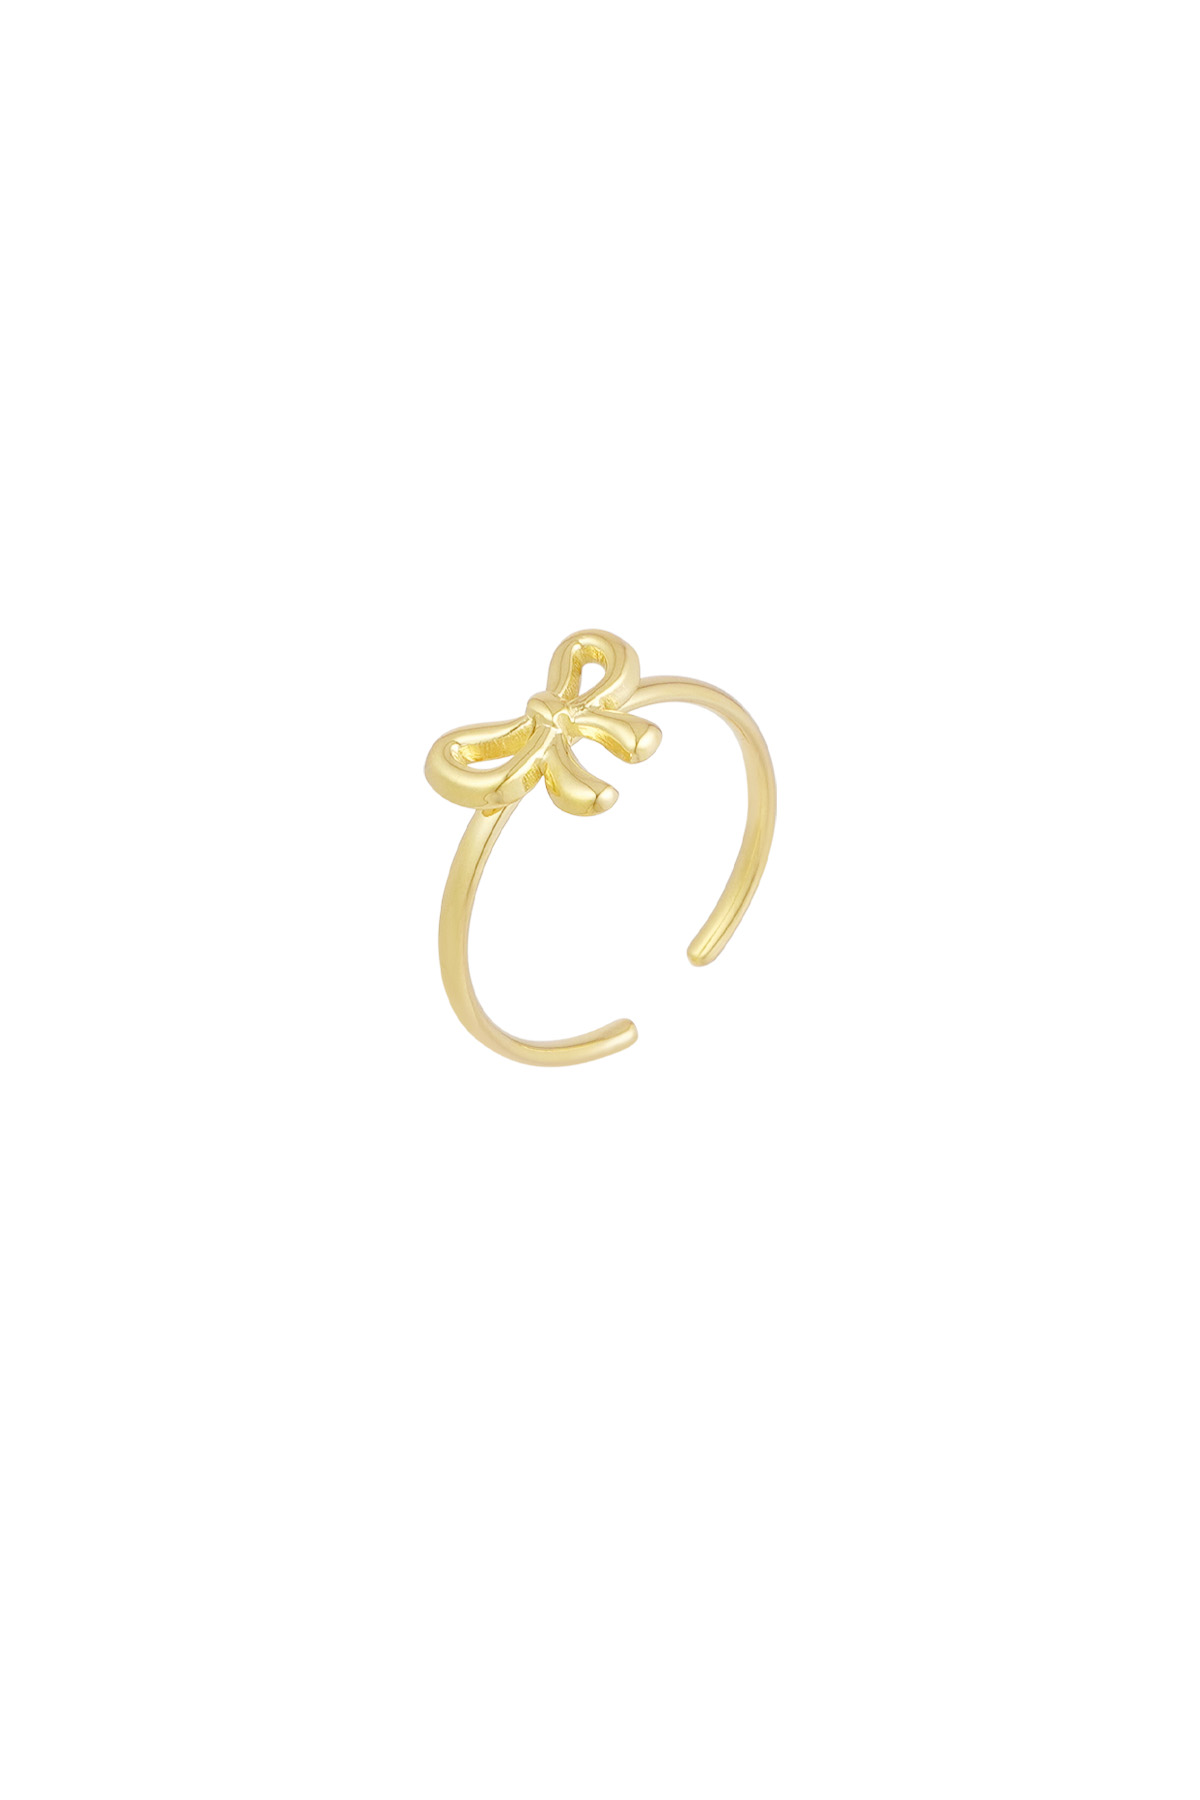 Ring bow life - goud  Afbeelding5